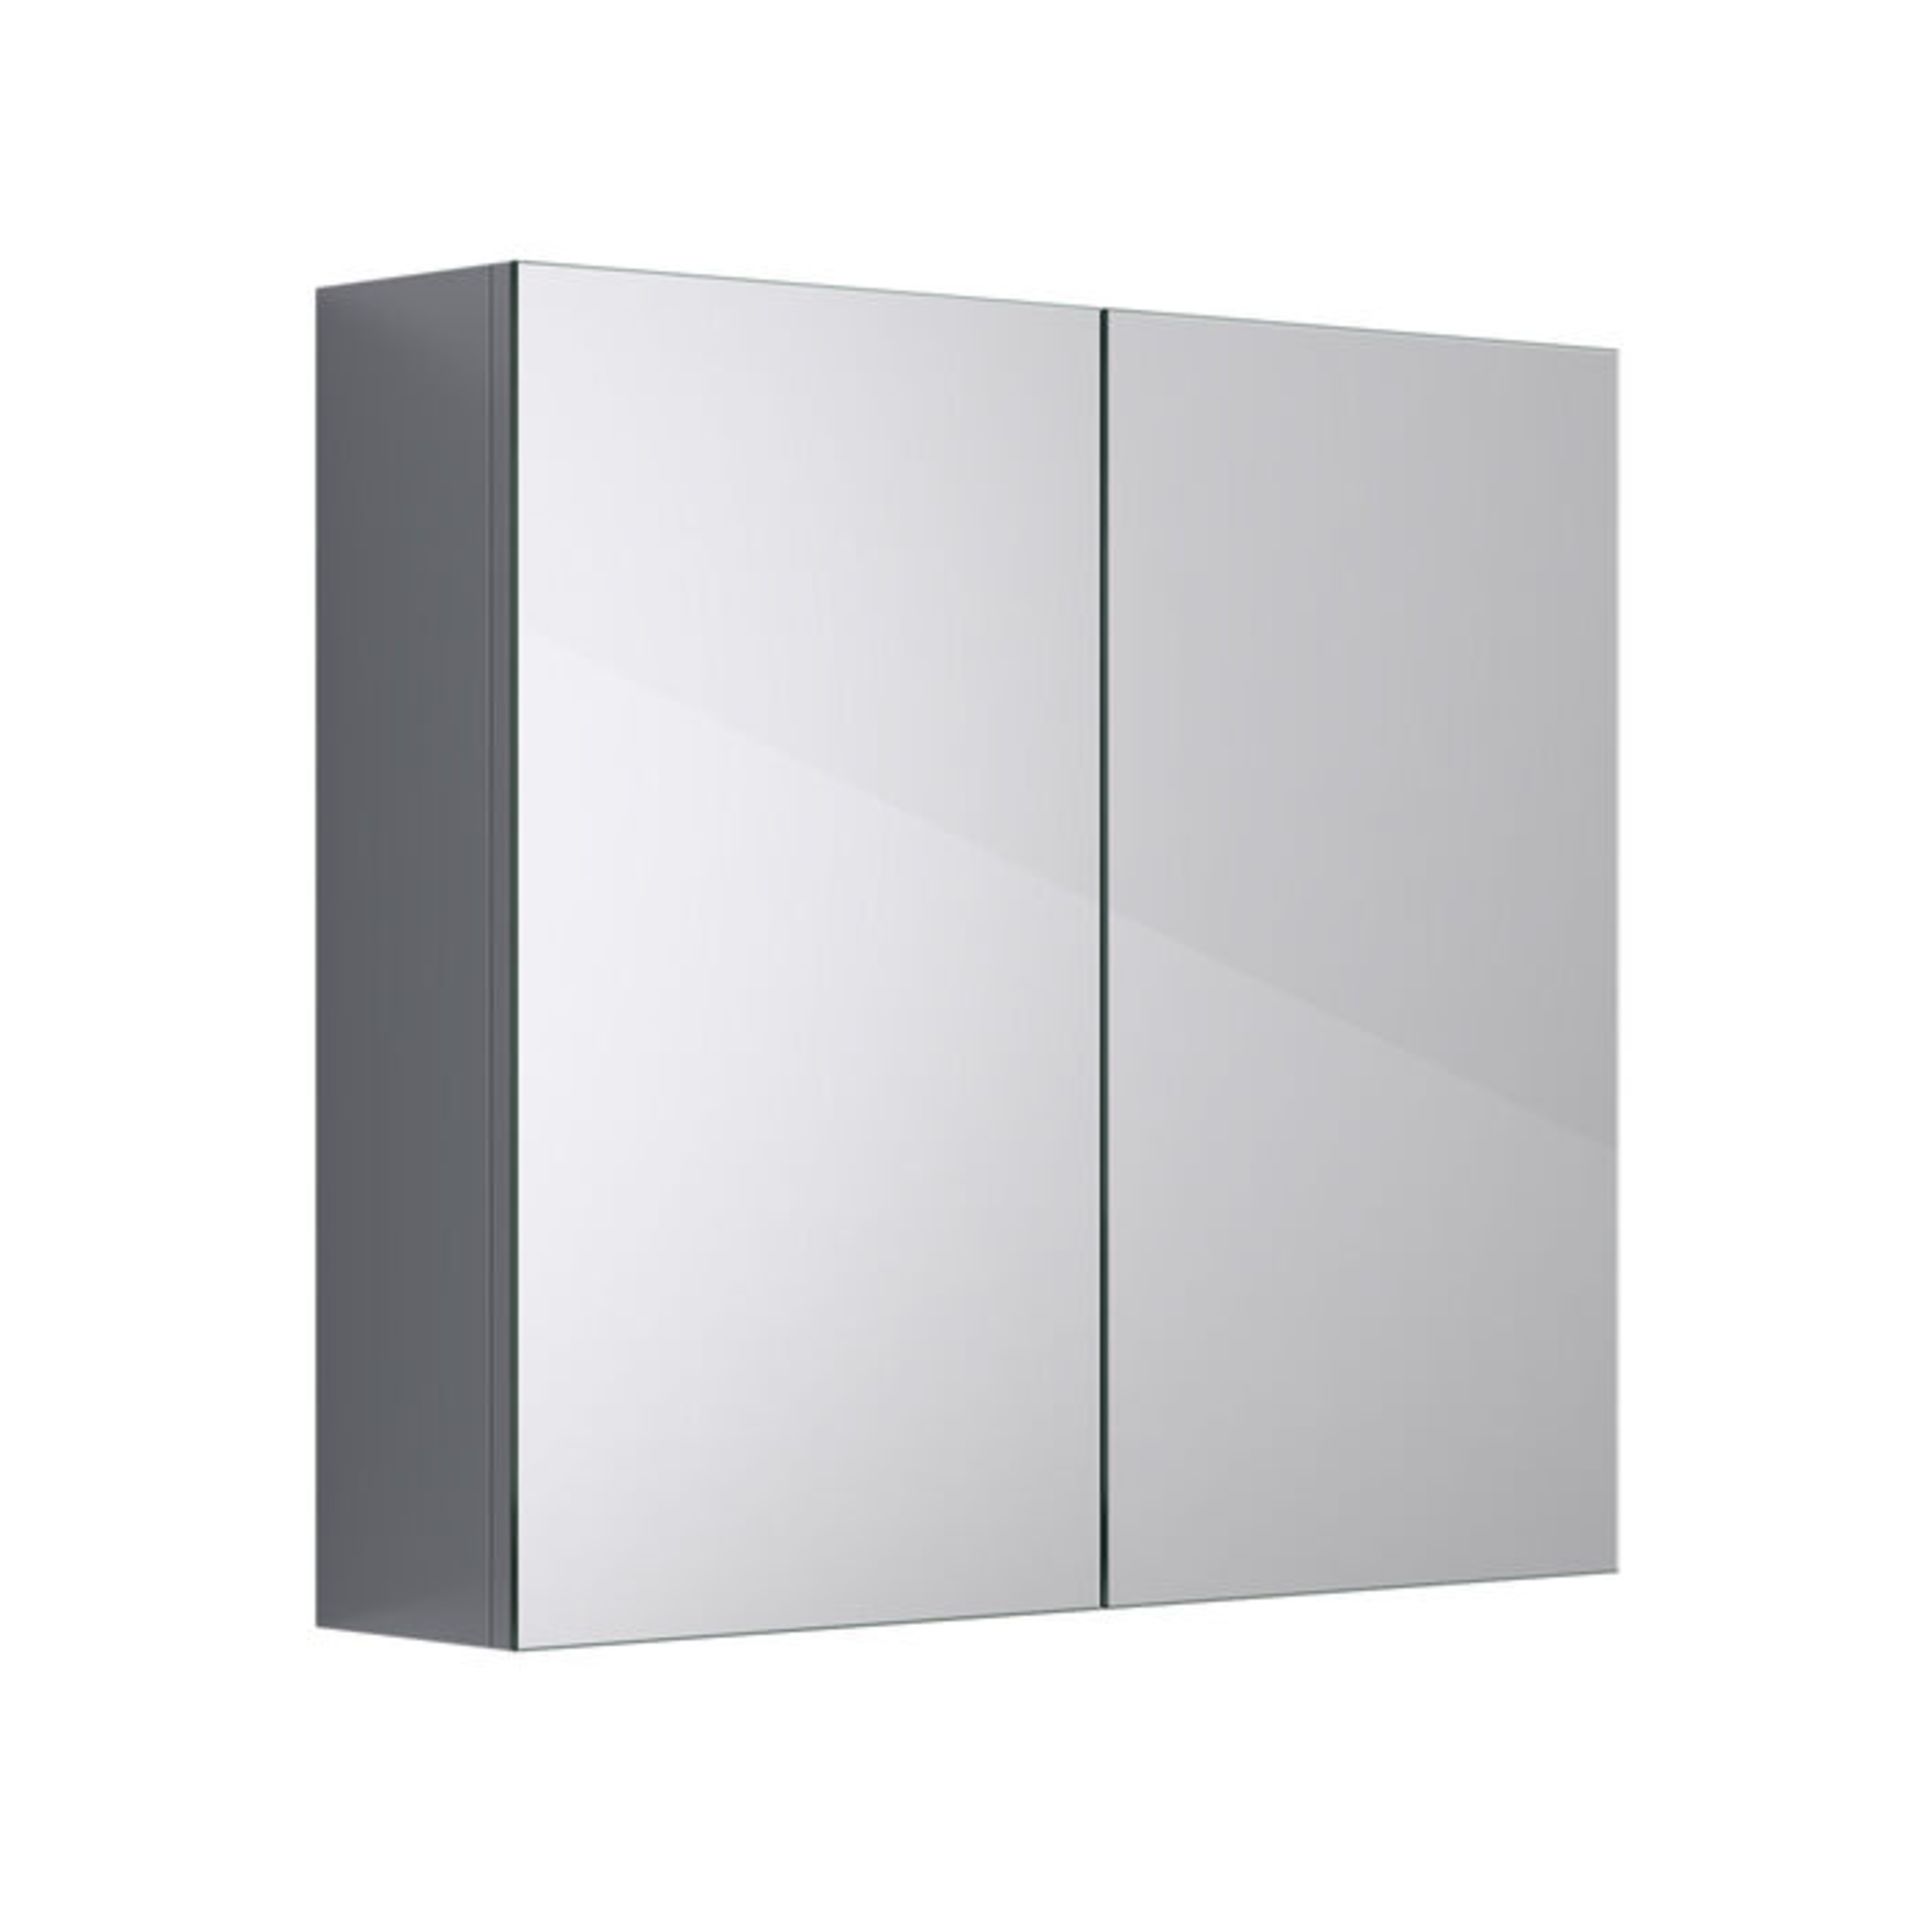 (QQ115) 667mm Harper Gloss Grey Double Door Mirror Cabinet. RRP £299.99. Part of our Flat Pack... - Image 4 of 4